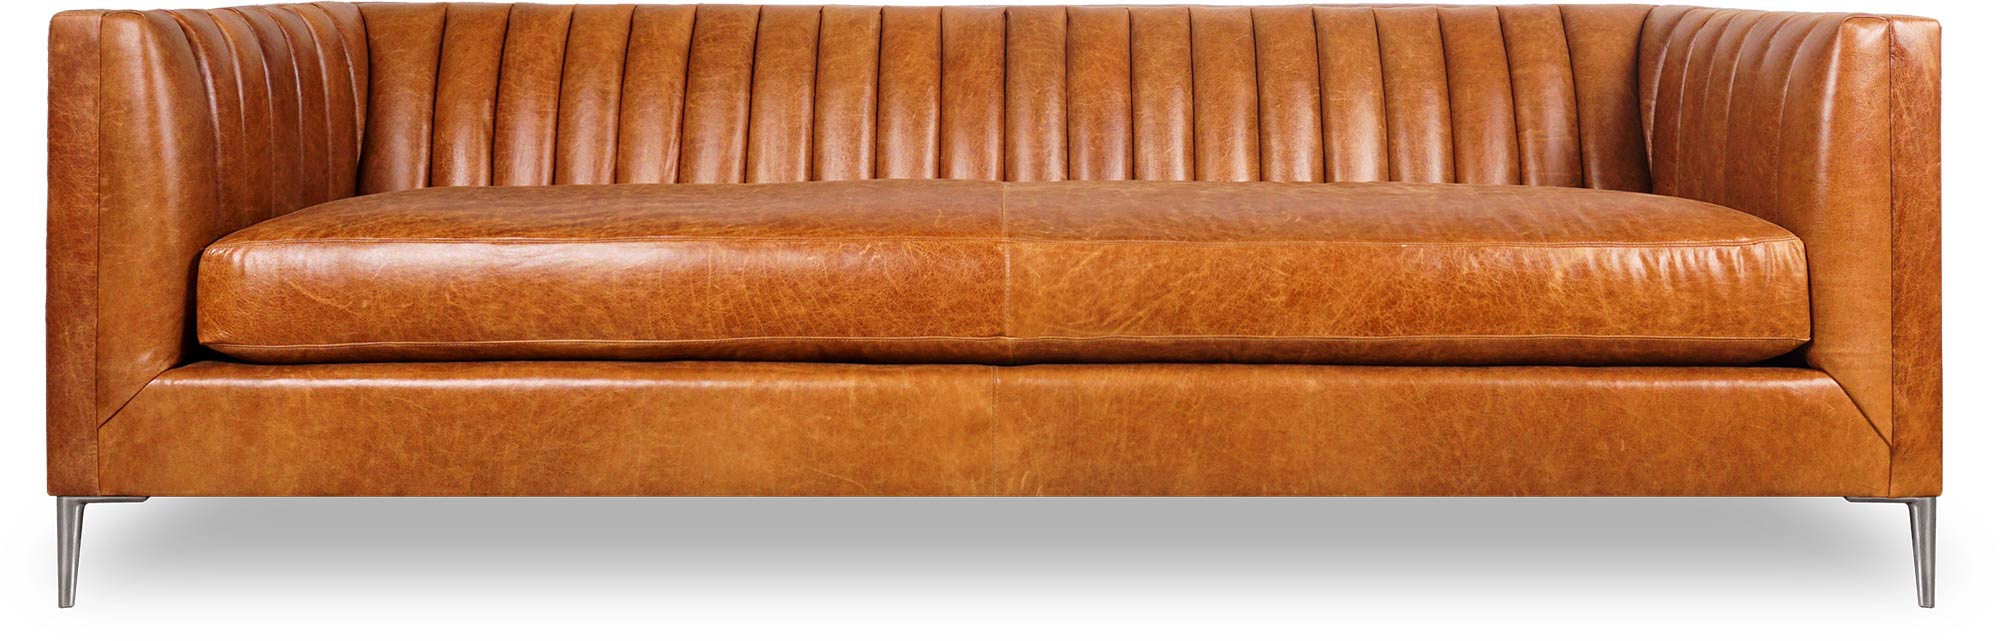 Modern Channel Tufted Shelter Sofas, What Is Tufted Leather Mean